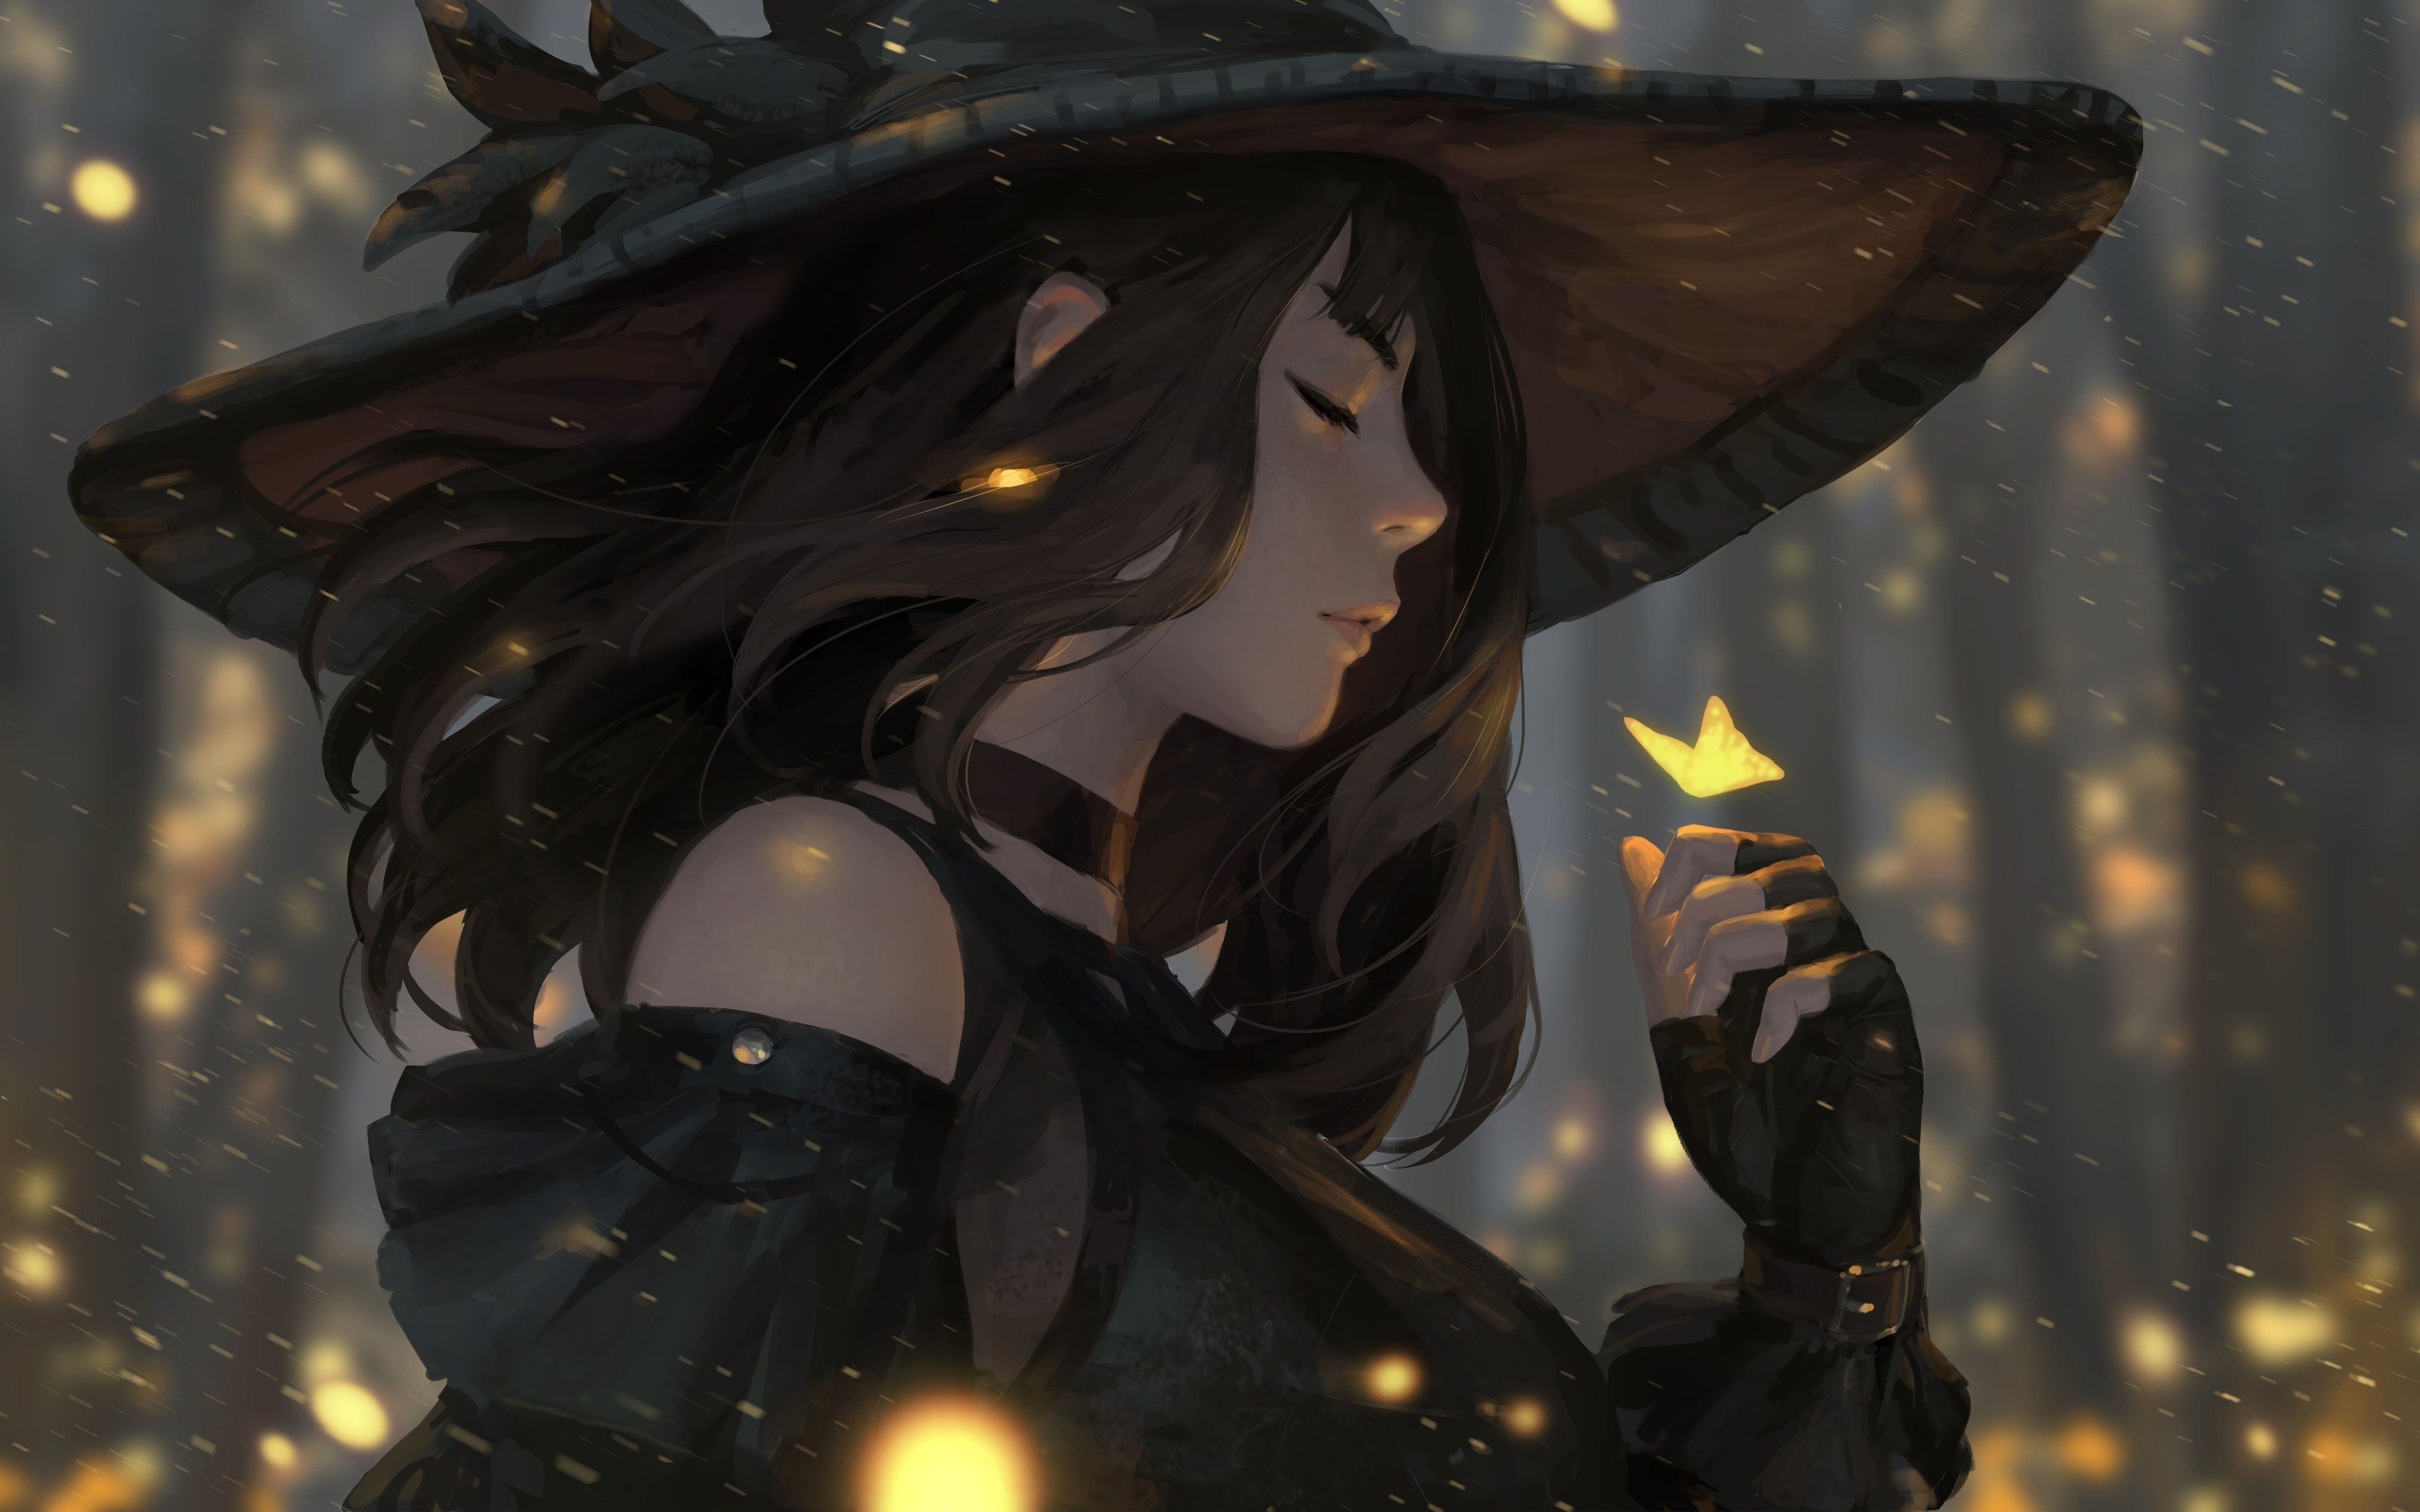 4096x2560 Download 4096x2560 Anime Witch Girl Profile View Closed Eyes Magic Spell Brown Hair Wallpaper